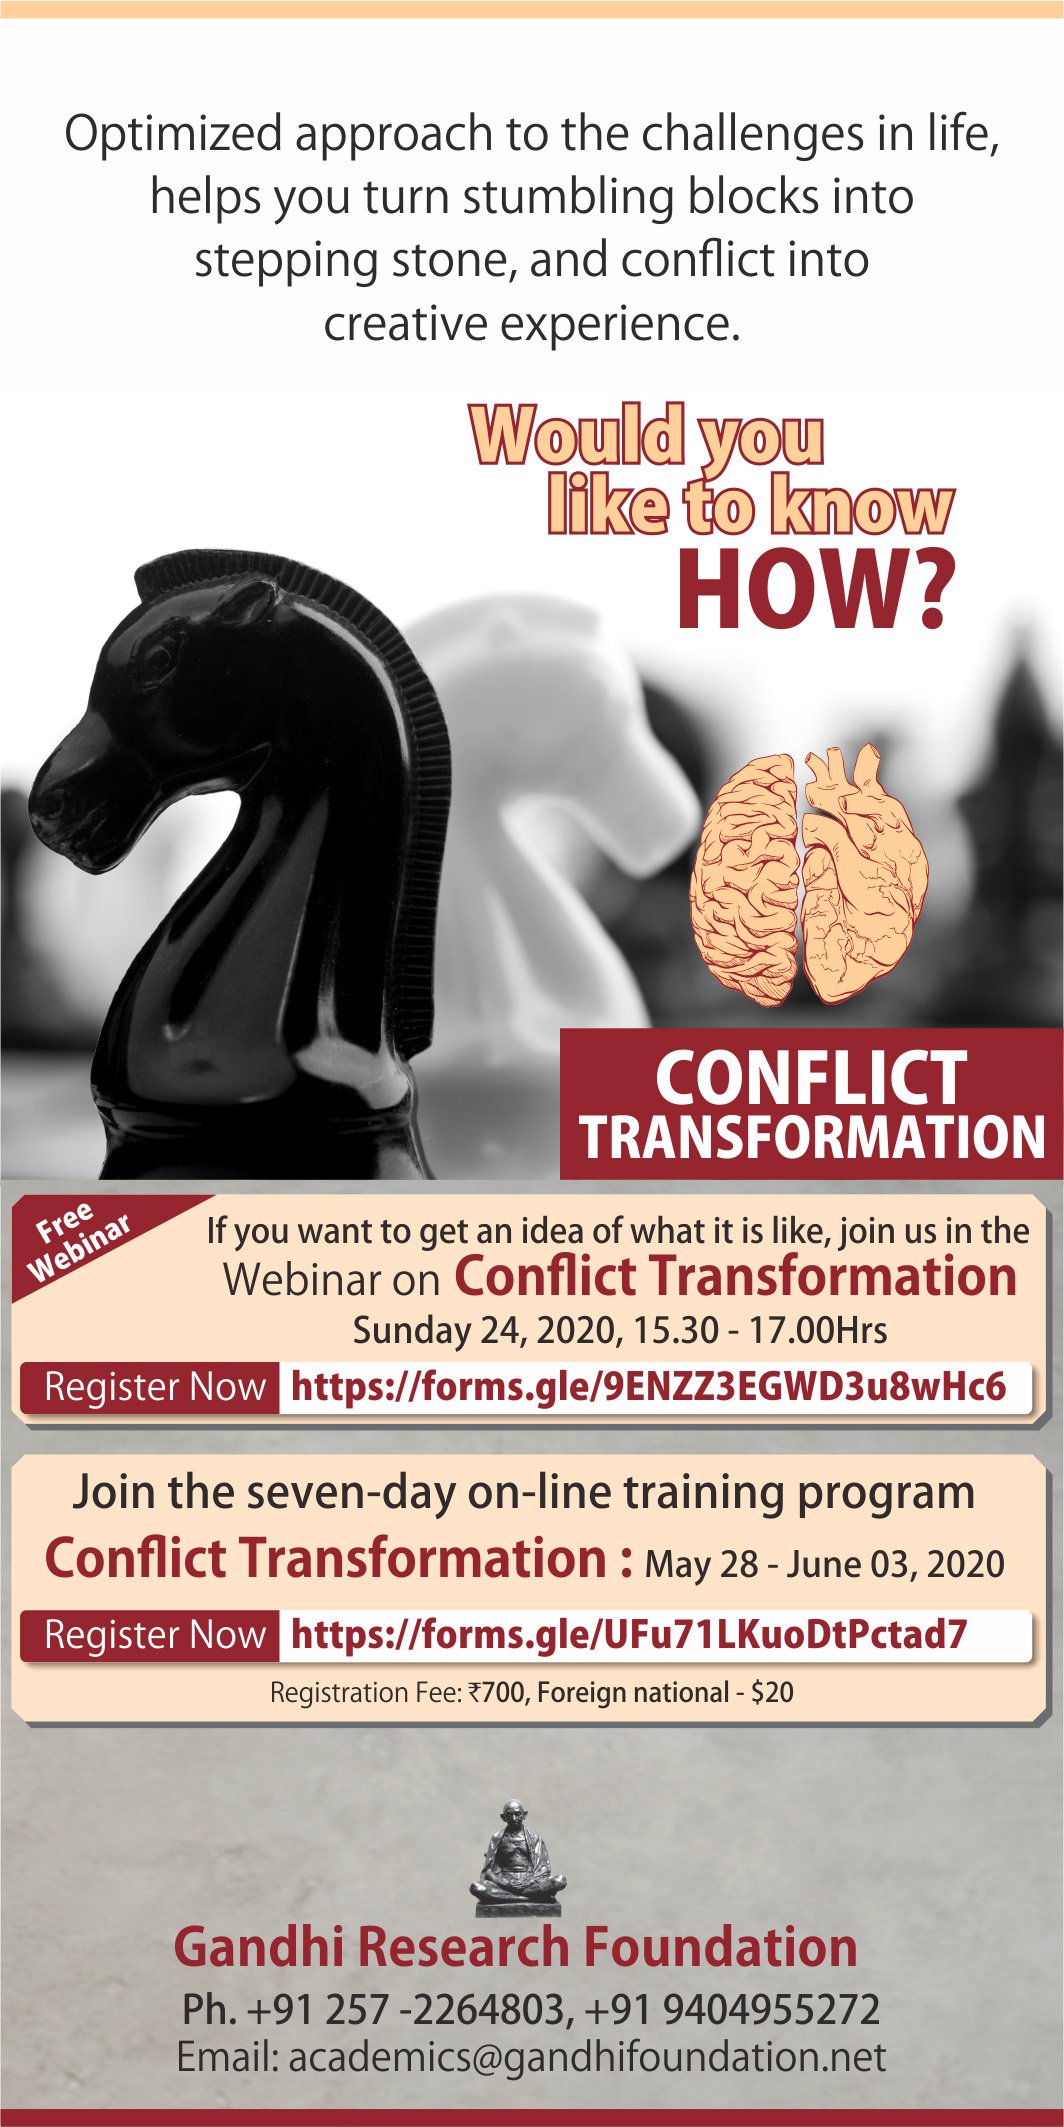 Online course on Conflict Transformation